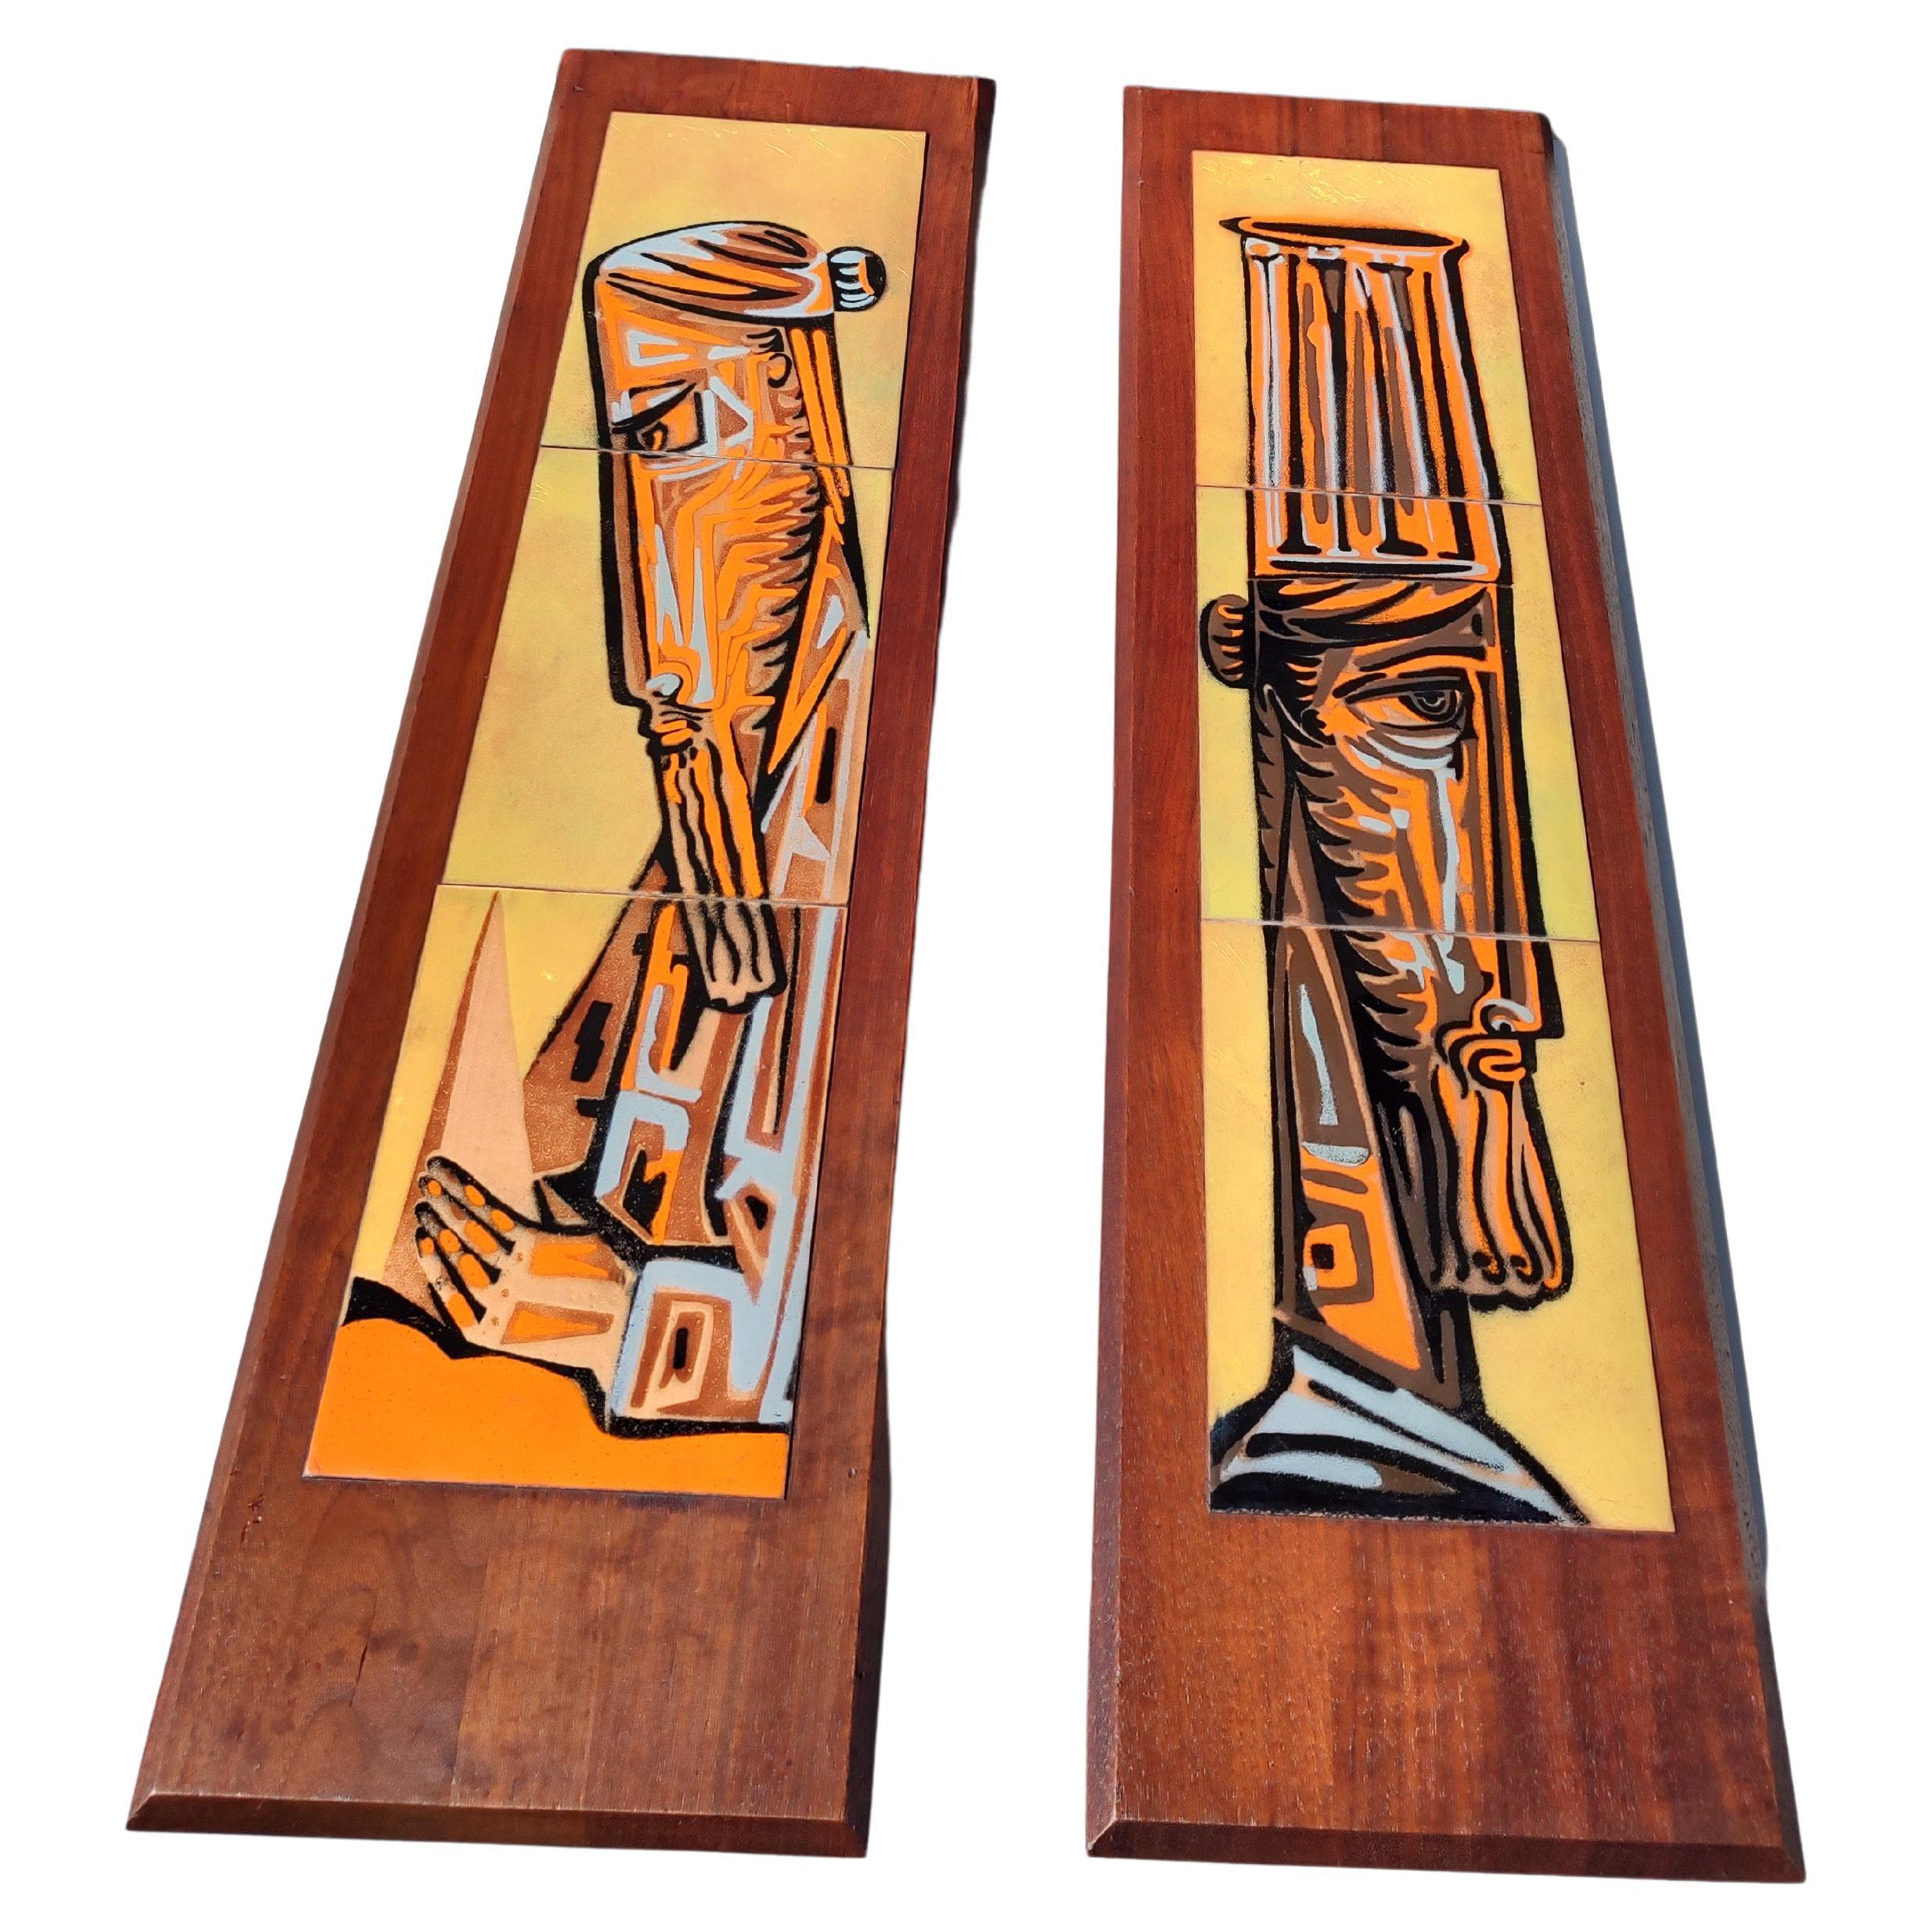 Pair of Mid-Century Modern Copper Enameled Wall Plaques, circa 1965